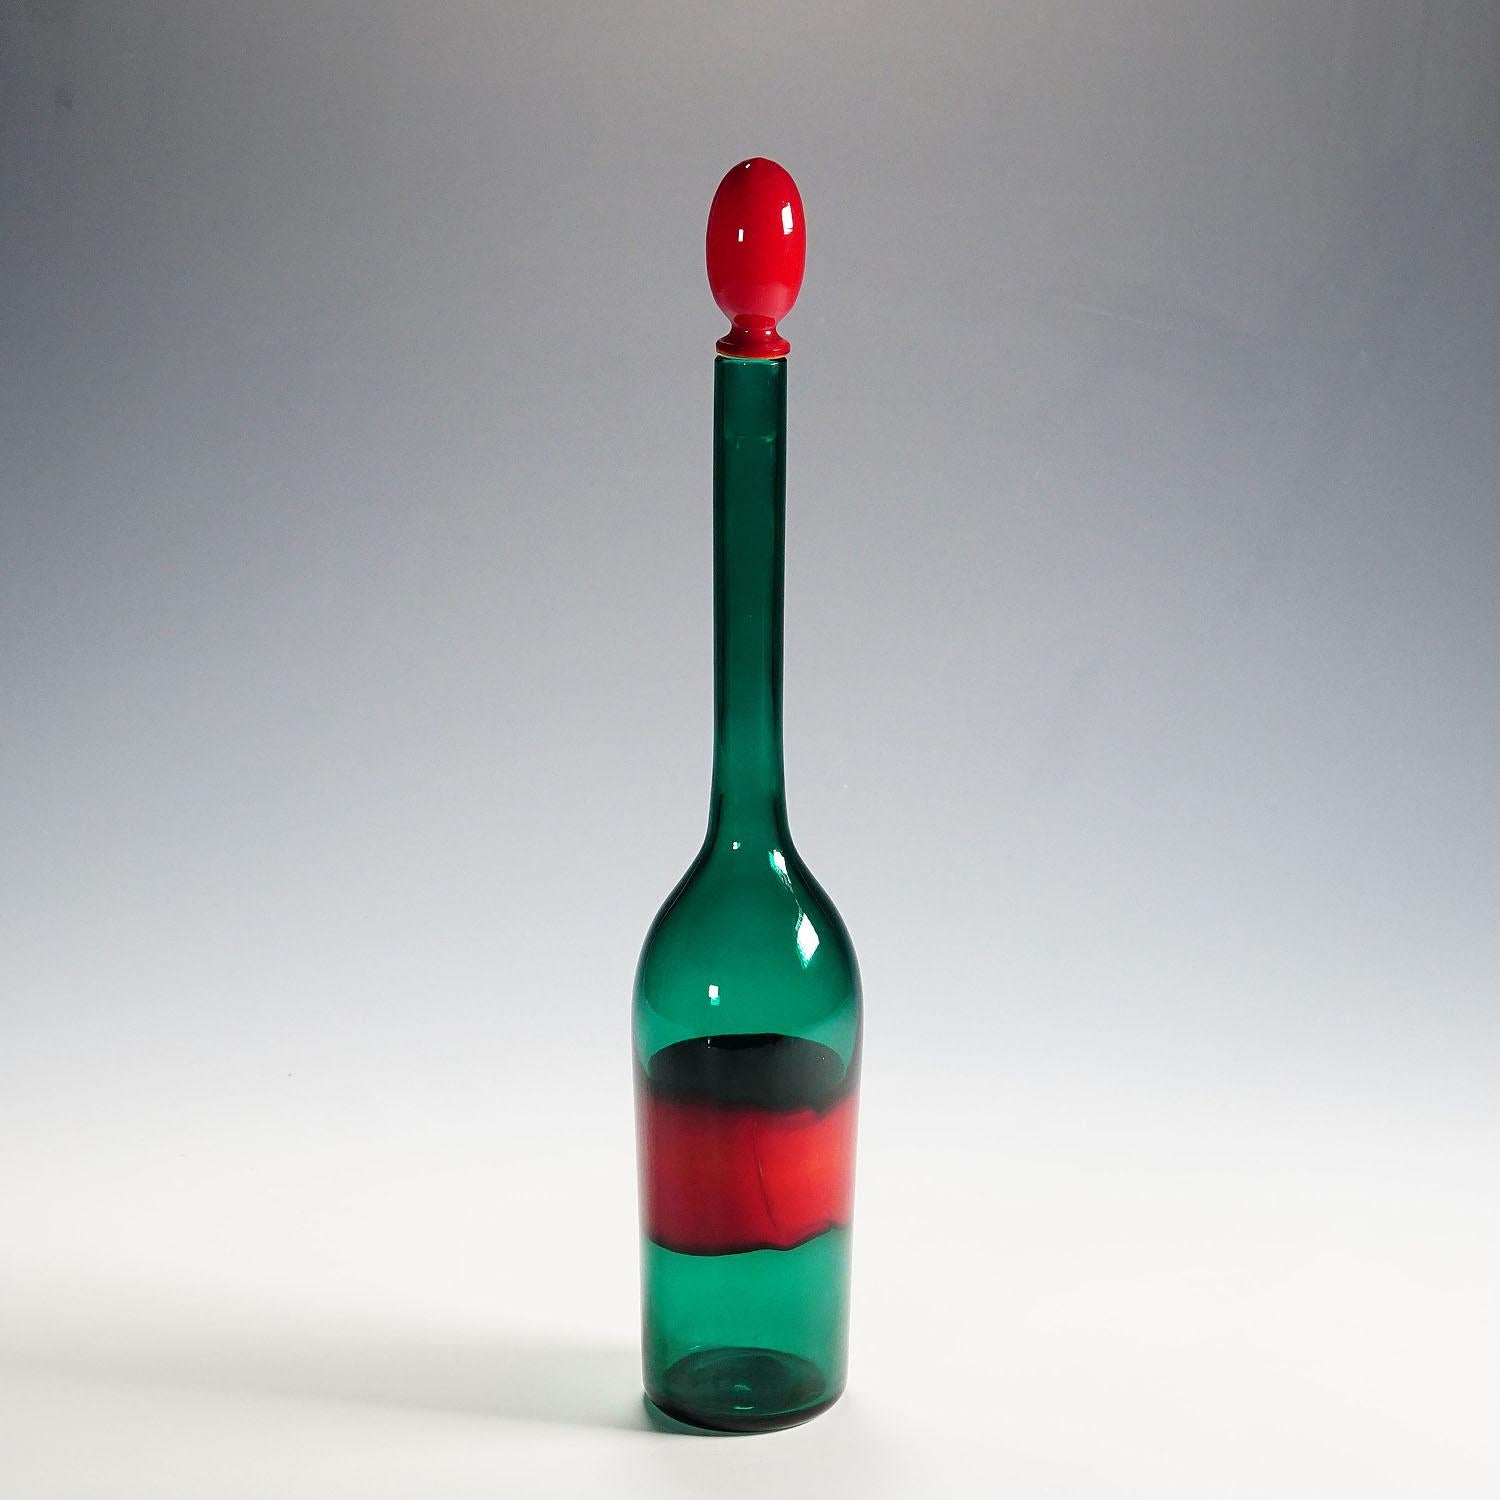 Venini Art Glass bottle with Fasce decoration, Murano 1950s

A large glass bottle in transparent green glass with red stopper and a red 